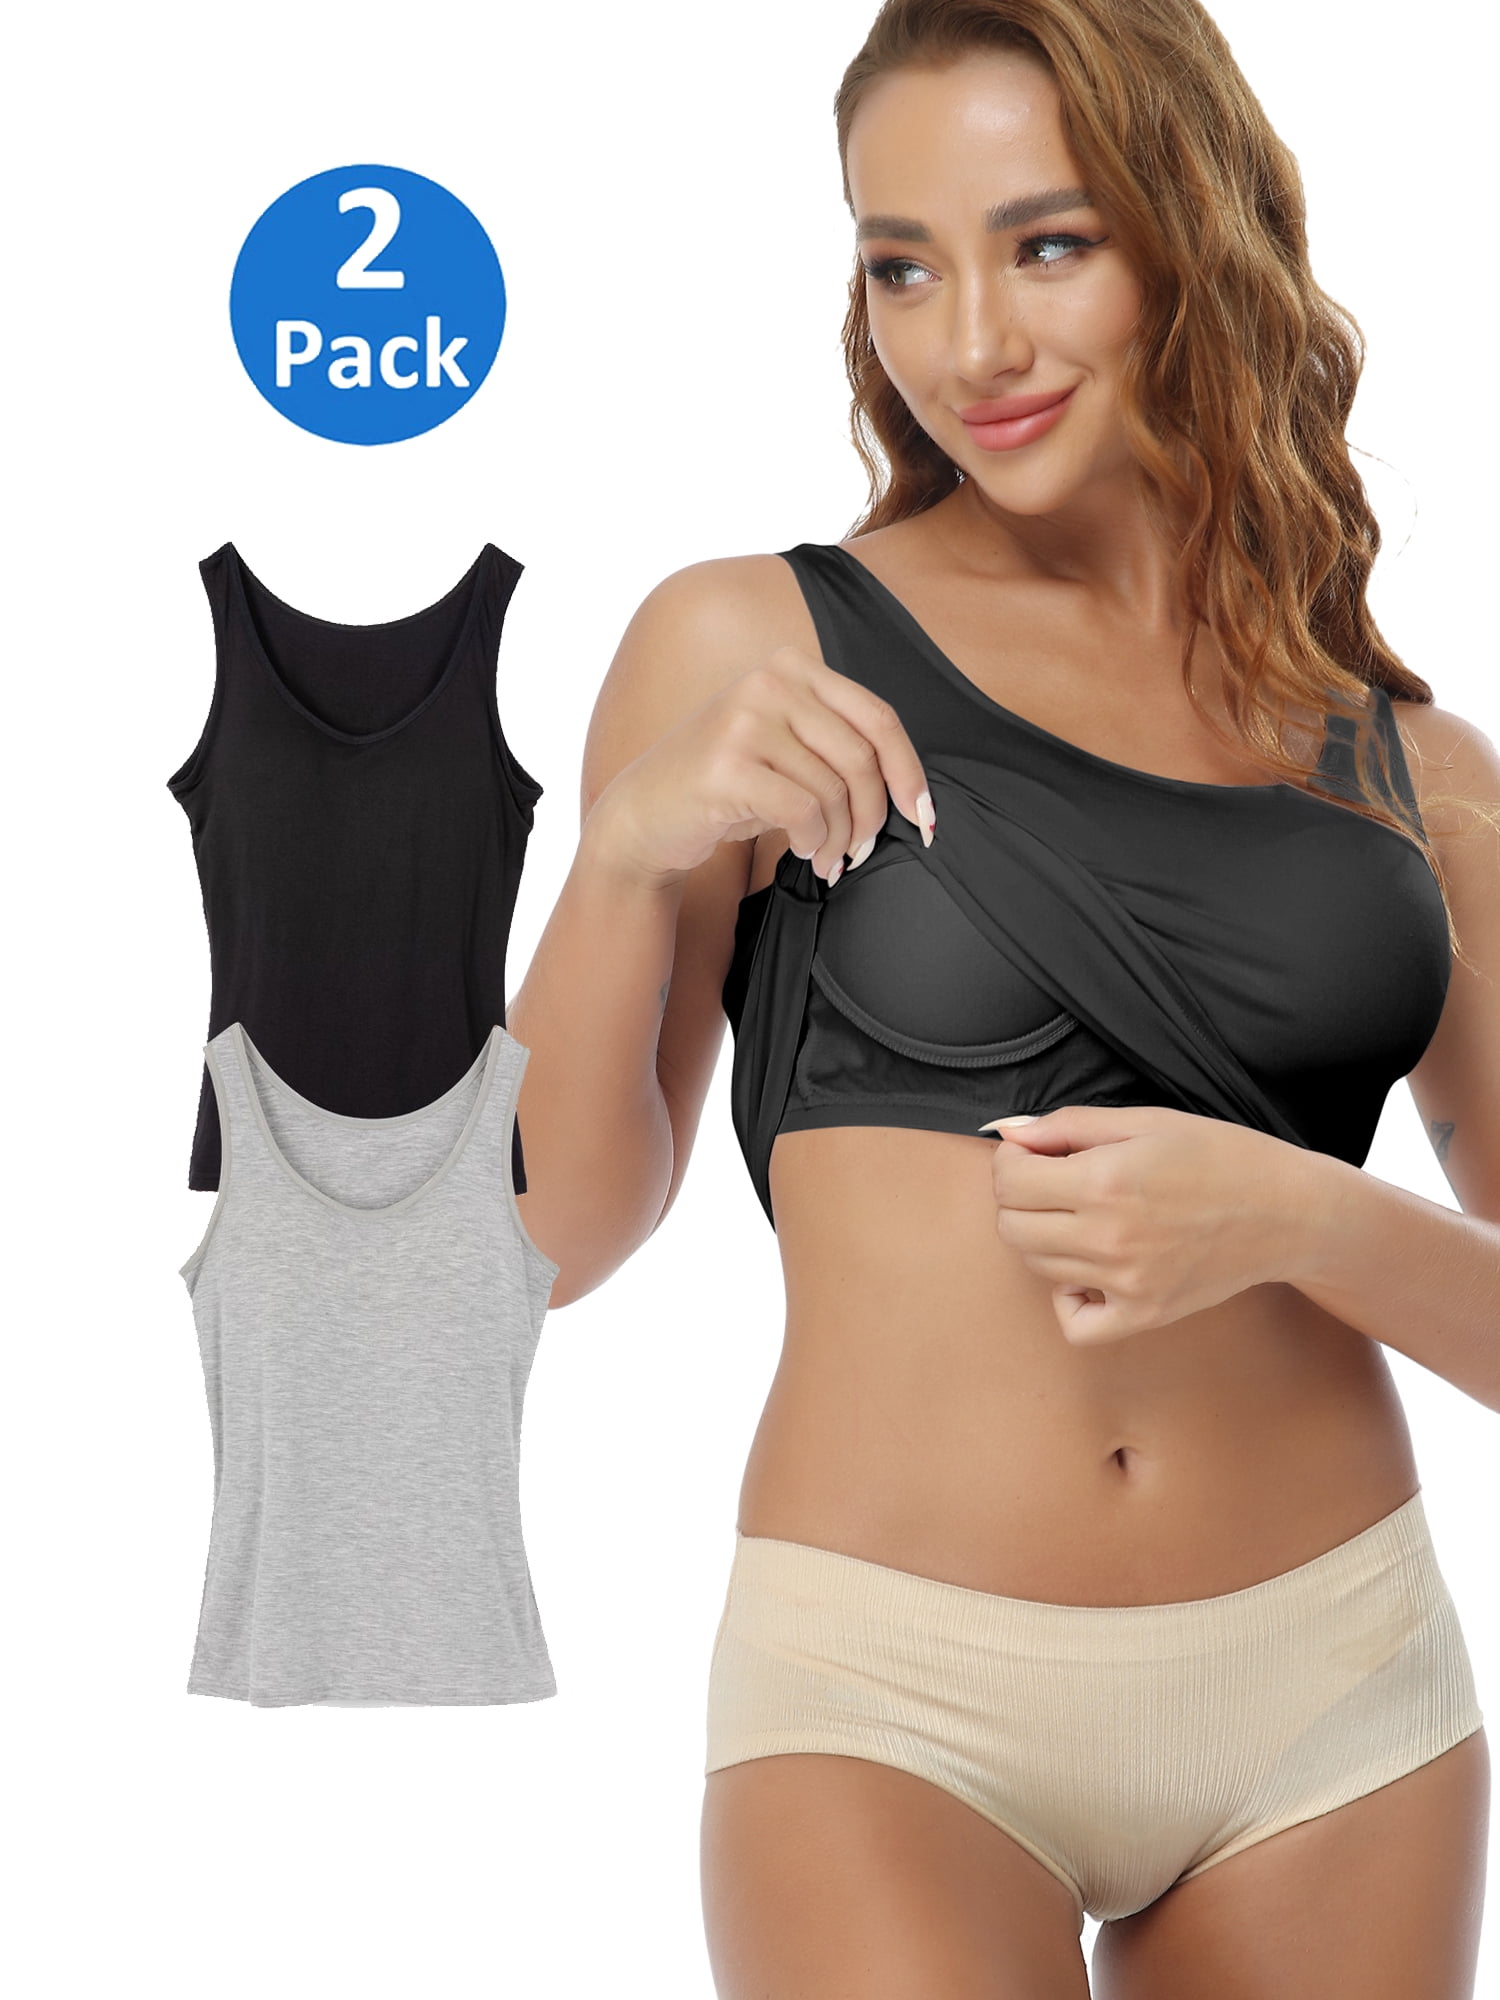 Shapewear Tank Top Cami Shaper with Built-in Removable Bra